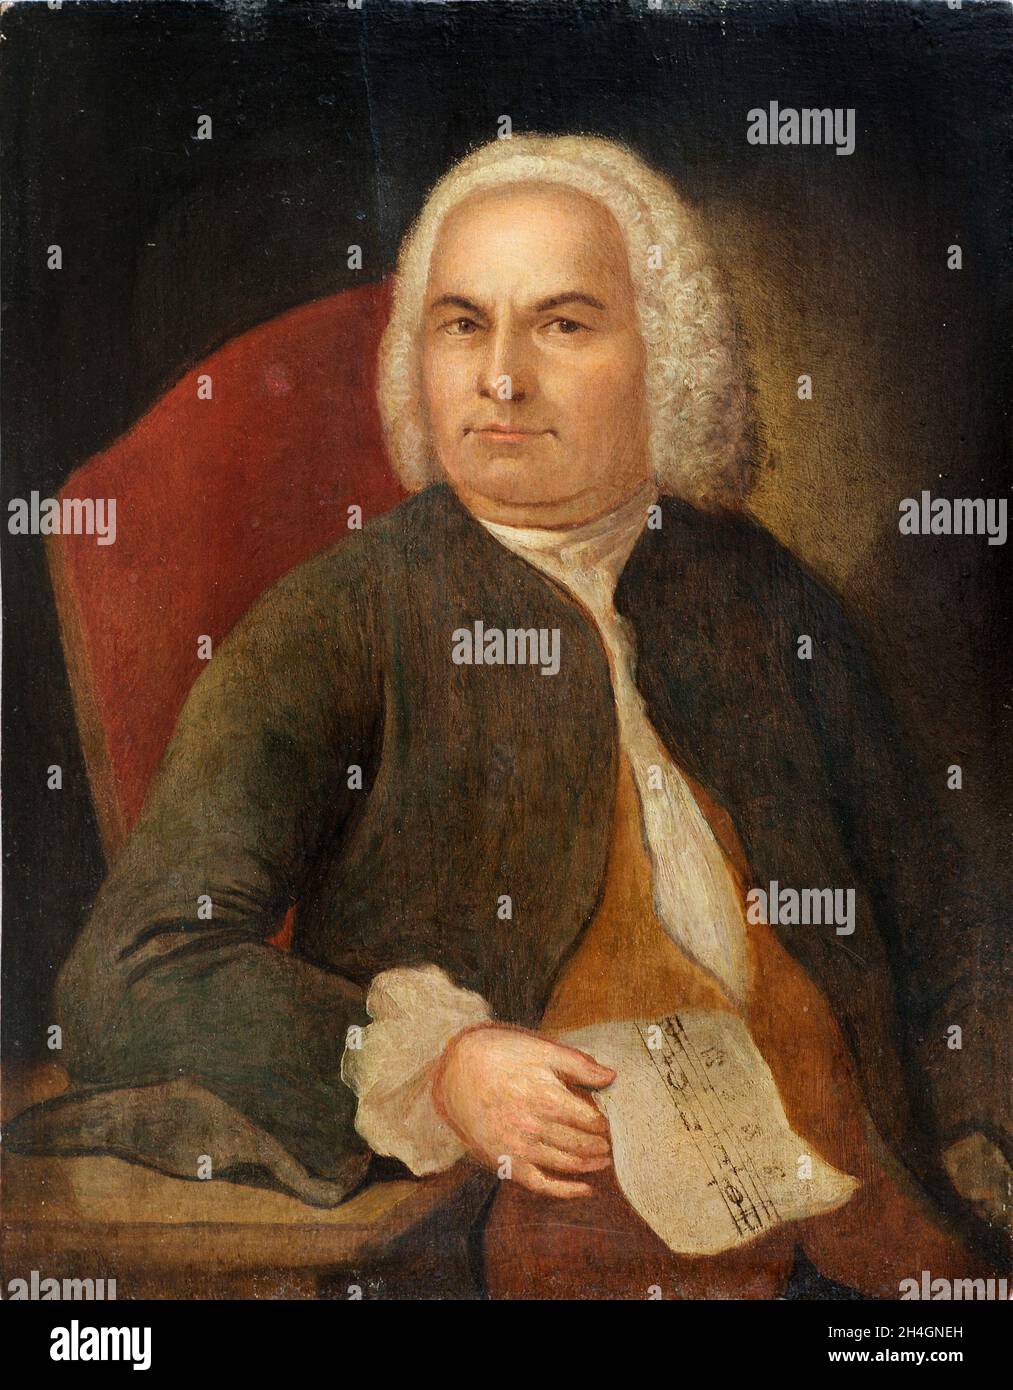 A portrait of the German composer JS Bach Stock Photo